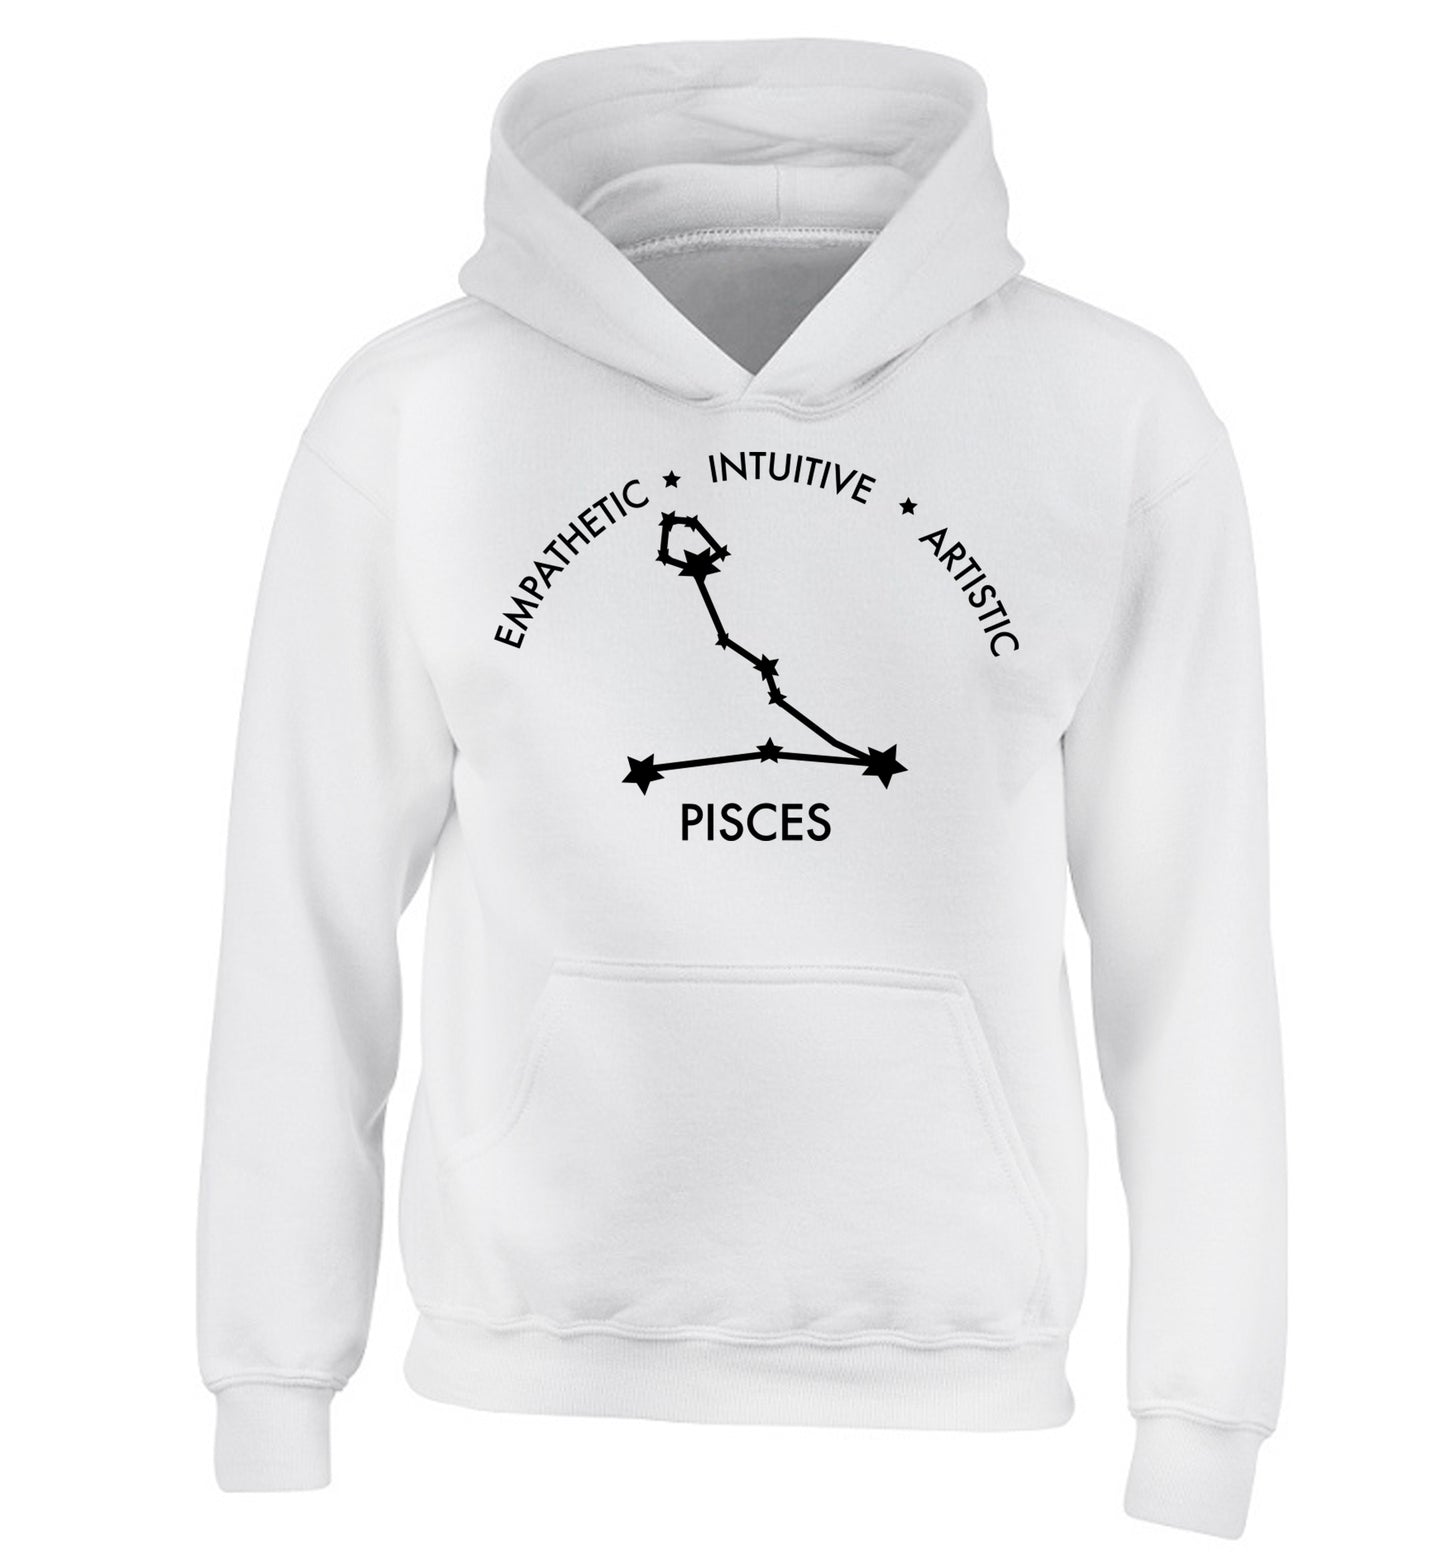 Capricorn: Ambitious | Patient | Gracious children's white hoodie 12-13 Years